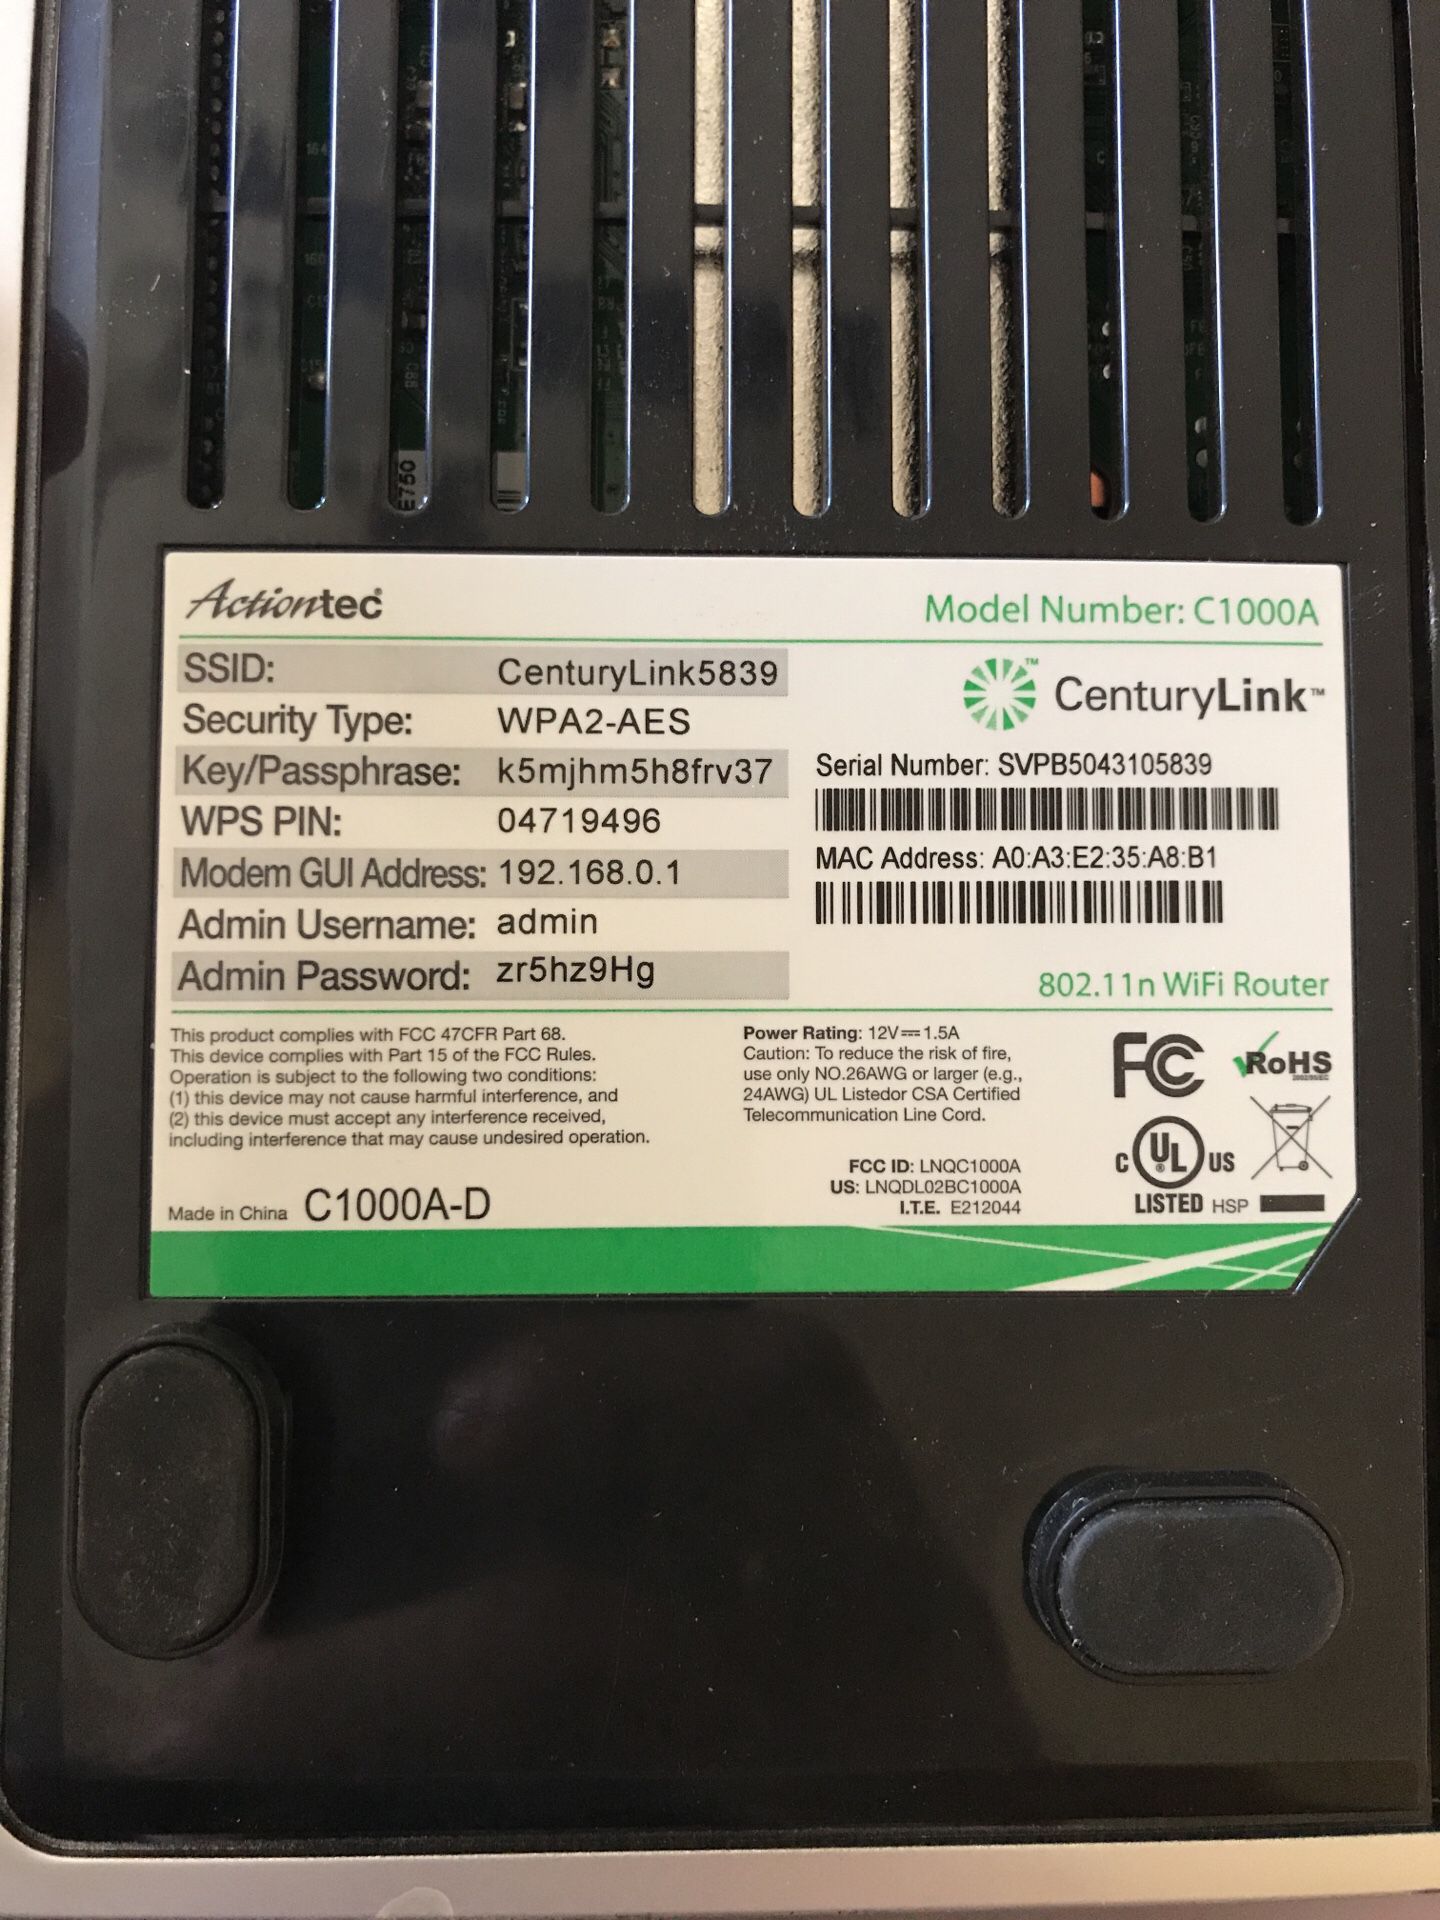 CenturyLink modem and WiFi router model C1000A